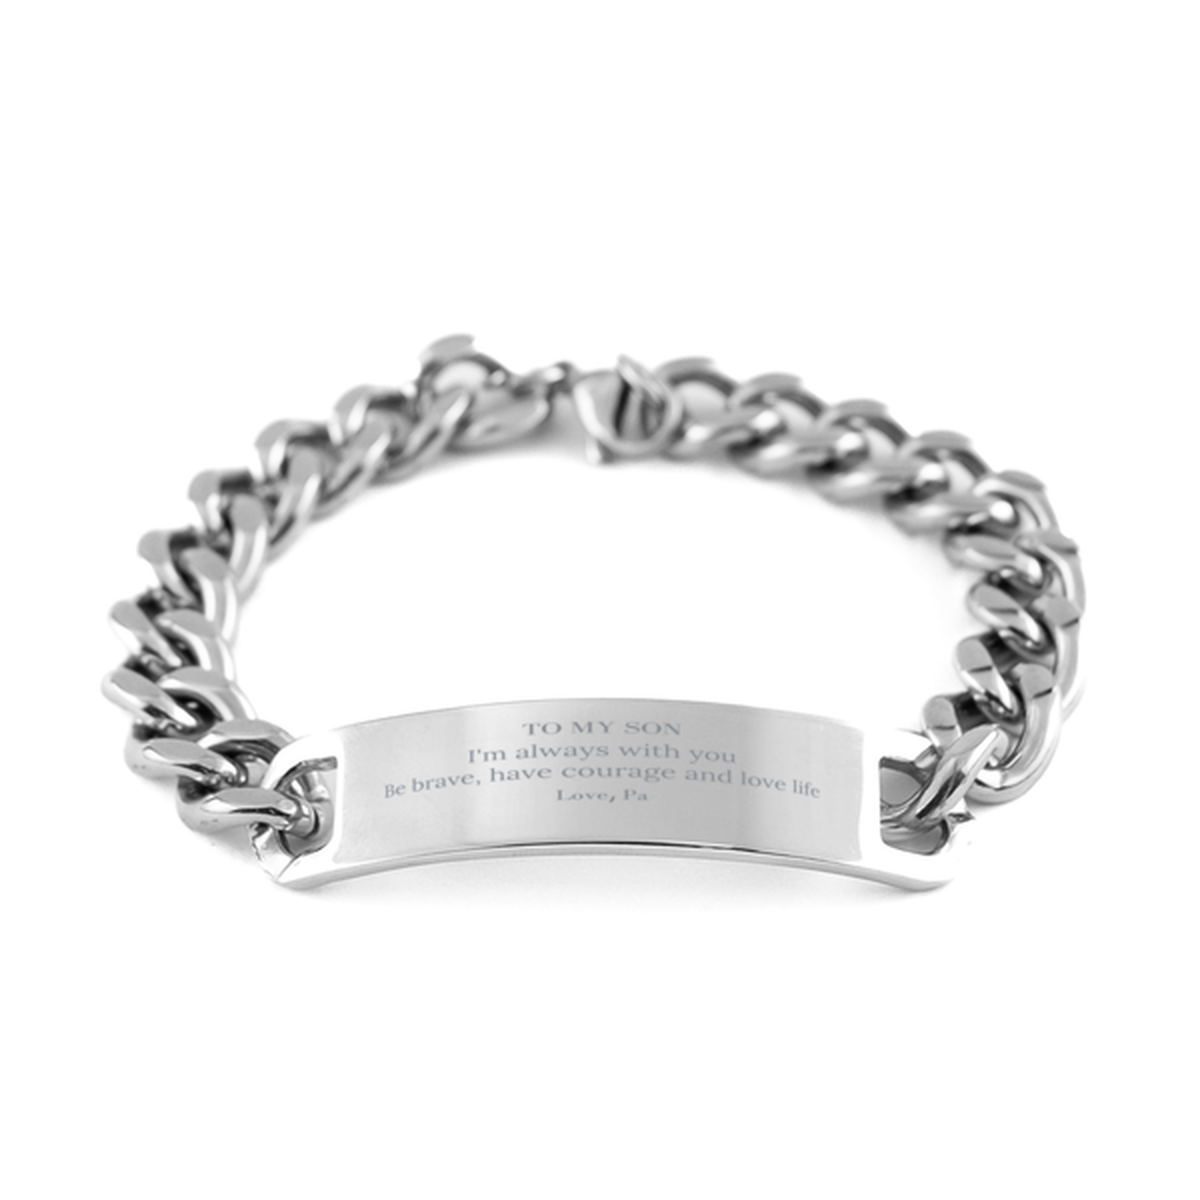 To My Son Gifts from Pa, Unique Cuban Chain Stainless Steel Bracelet Inspirational Christmas Birthday Graduation Gifts for Son I'm always with you. Be brave, have courage and love life. Love, Pa